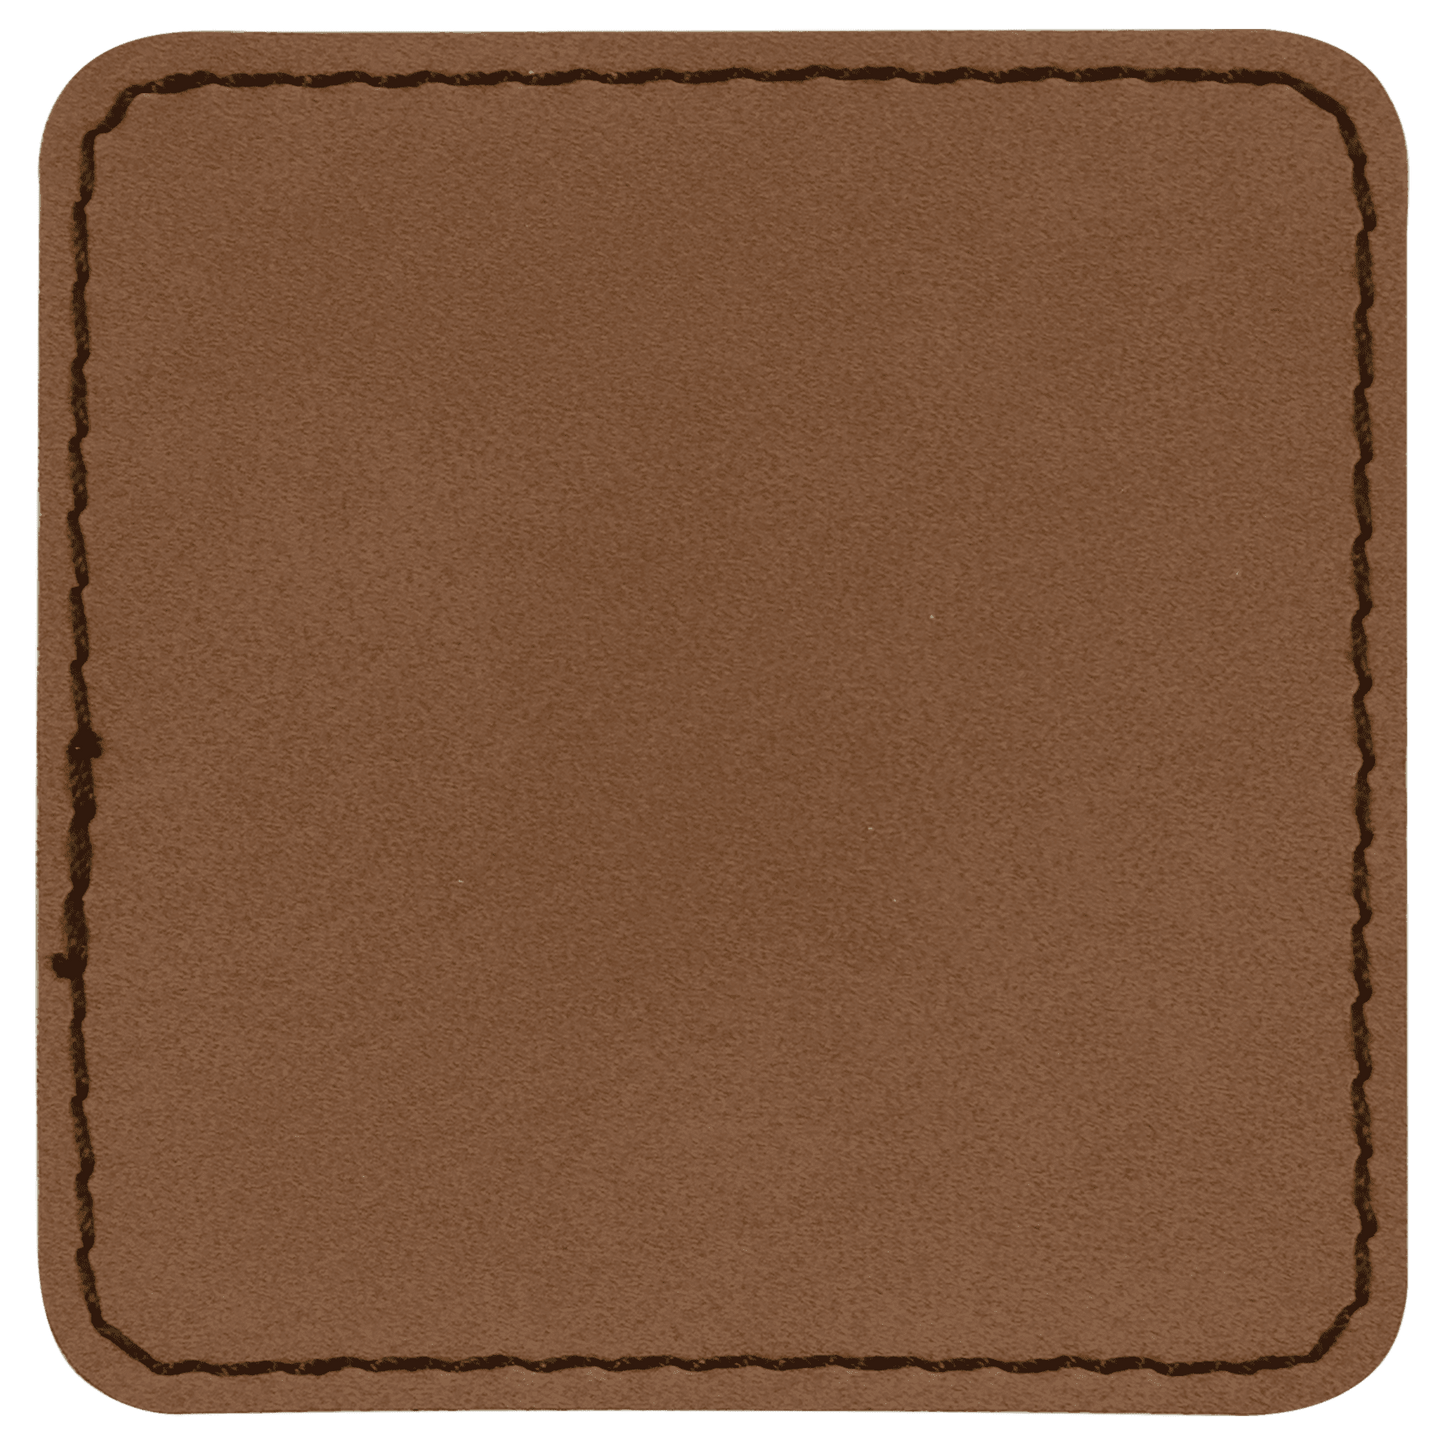 2 1/2" x 2 1/2" Square Dark Brown Laserable/DTF/UV DTF Leatherette Patch with Heat Adhesive